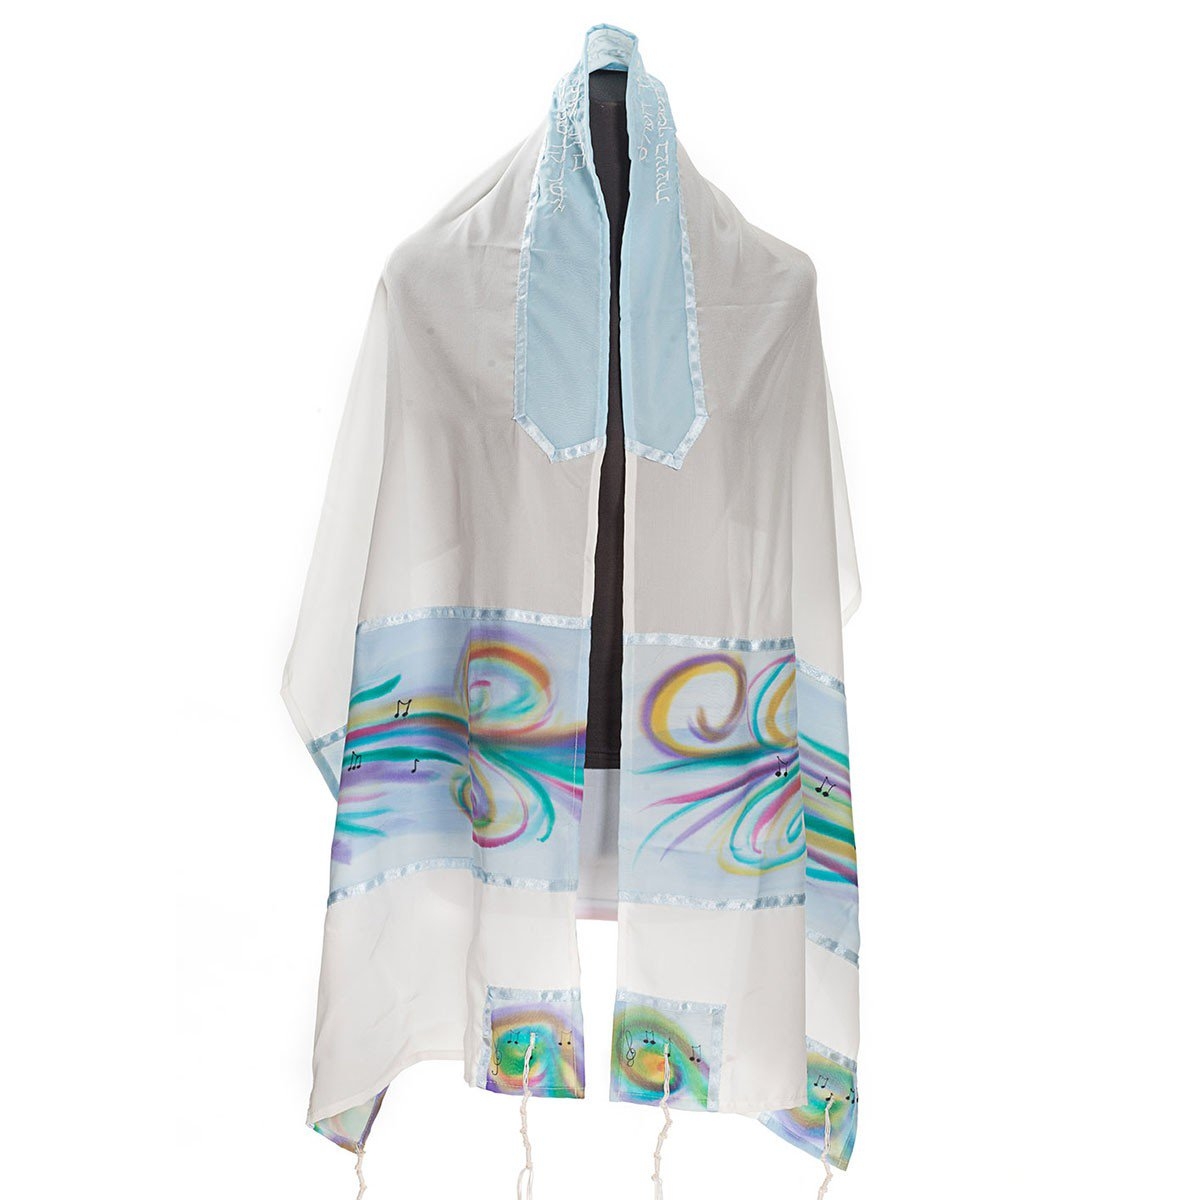 Galilee Silks Multicolored Musical Tallit for Women - 1